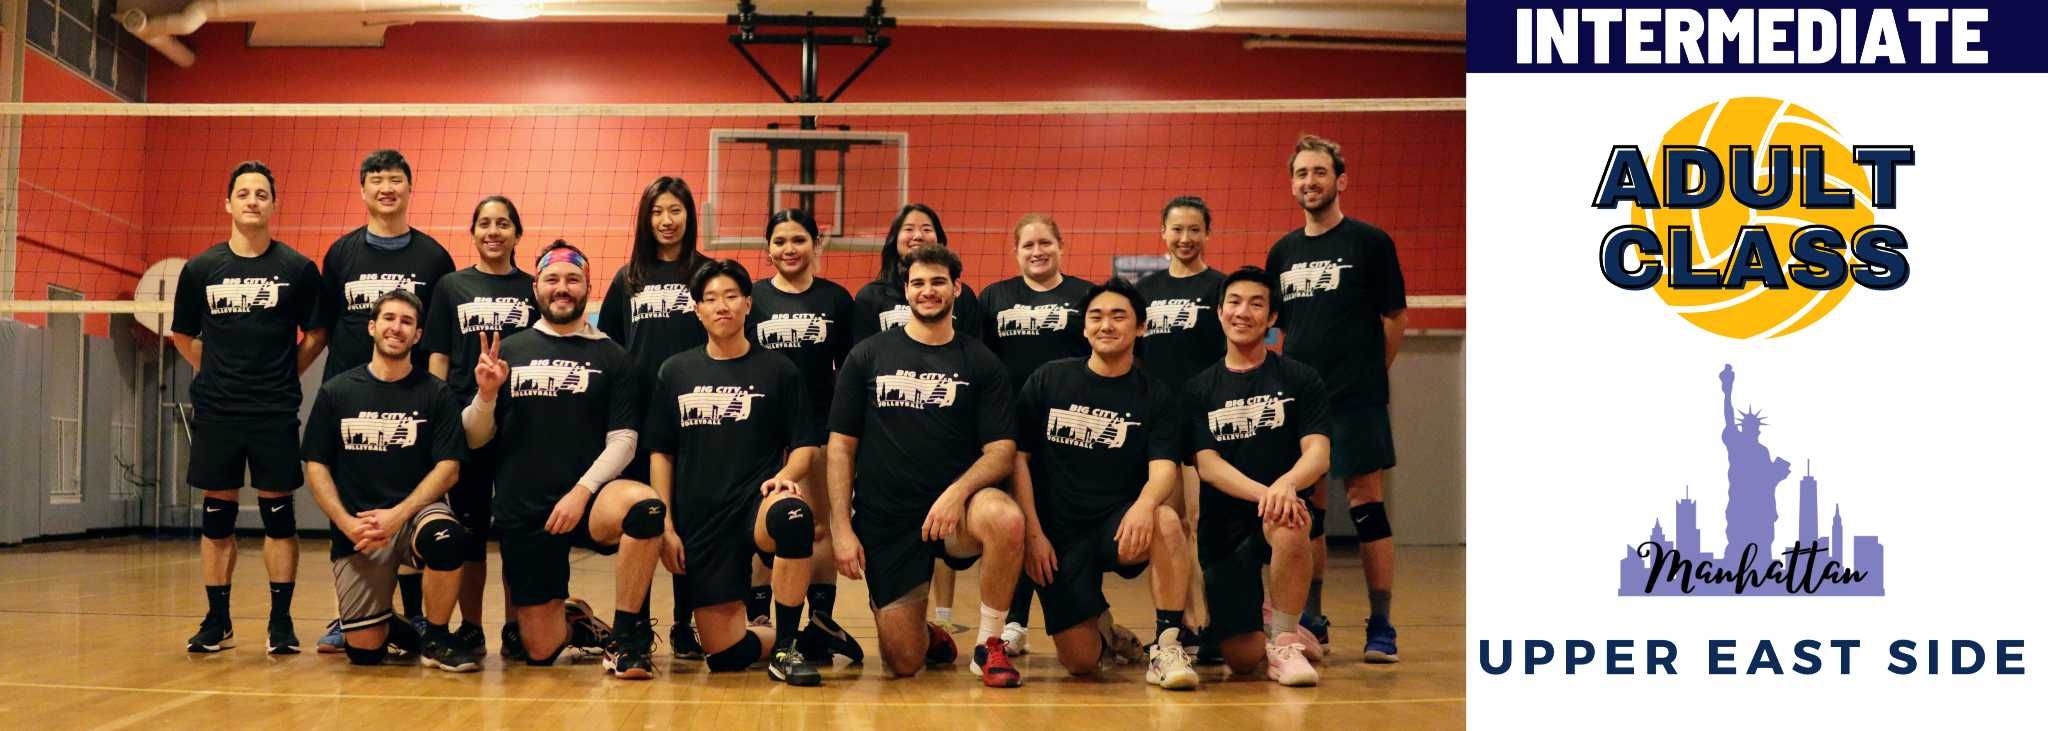 Adult Classes  Big City Volleyball